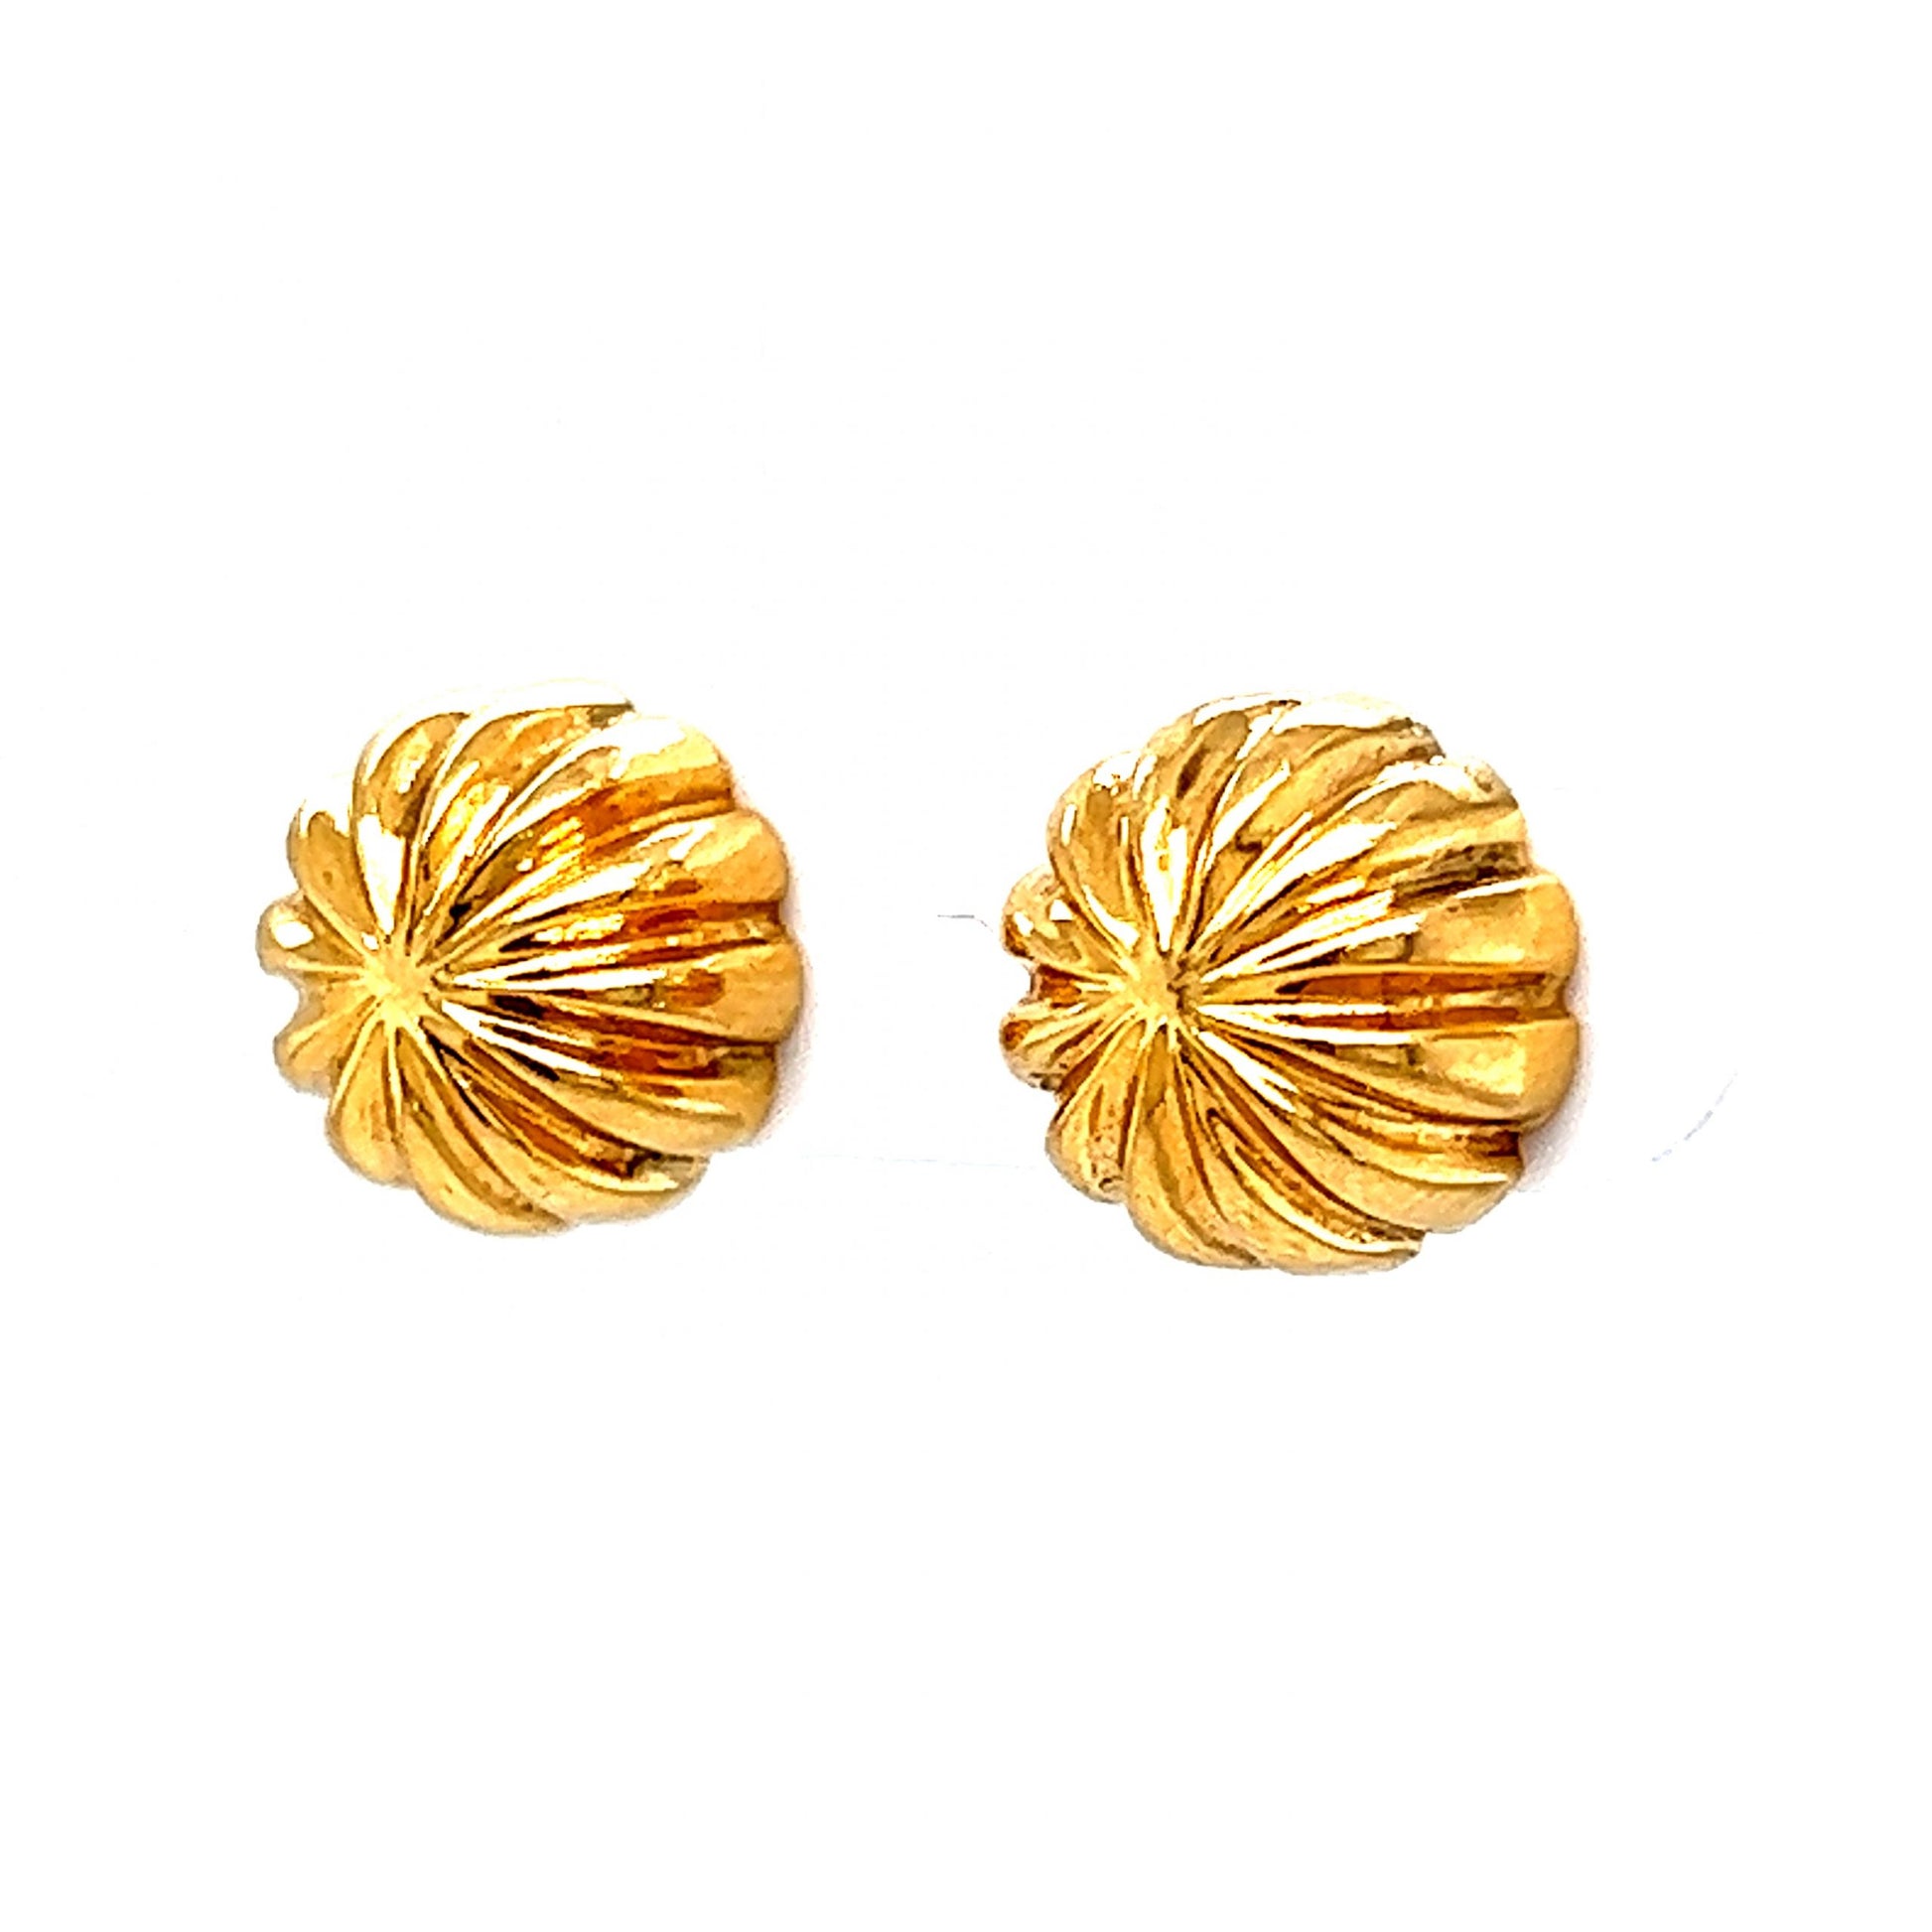 Round Earring Posts in Stardust Textured finish, 18K Gold Plated, Lead –  UniqueBeadsNY